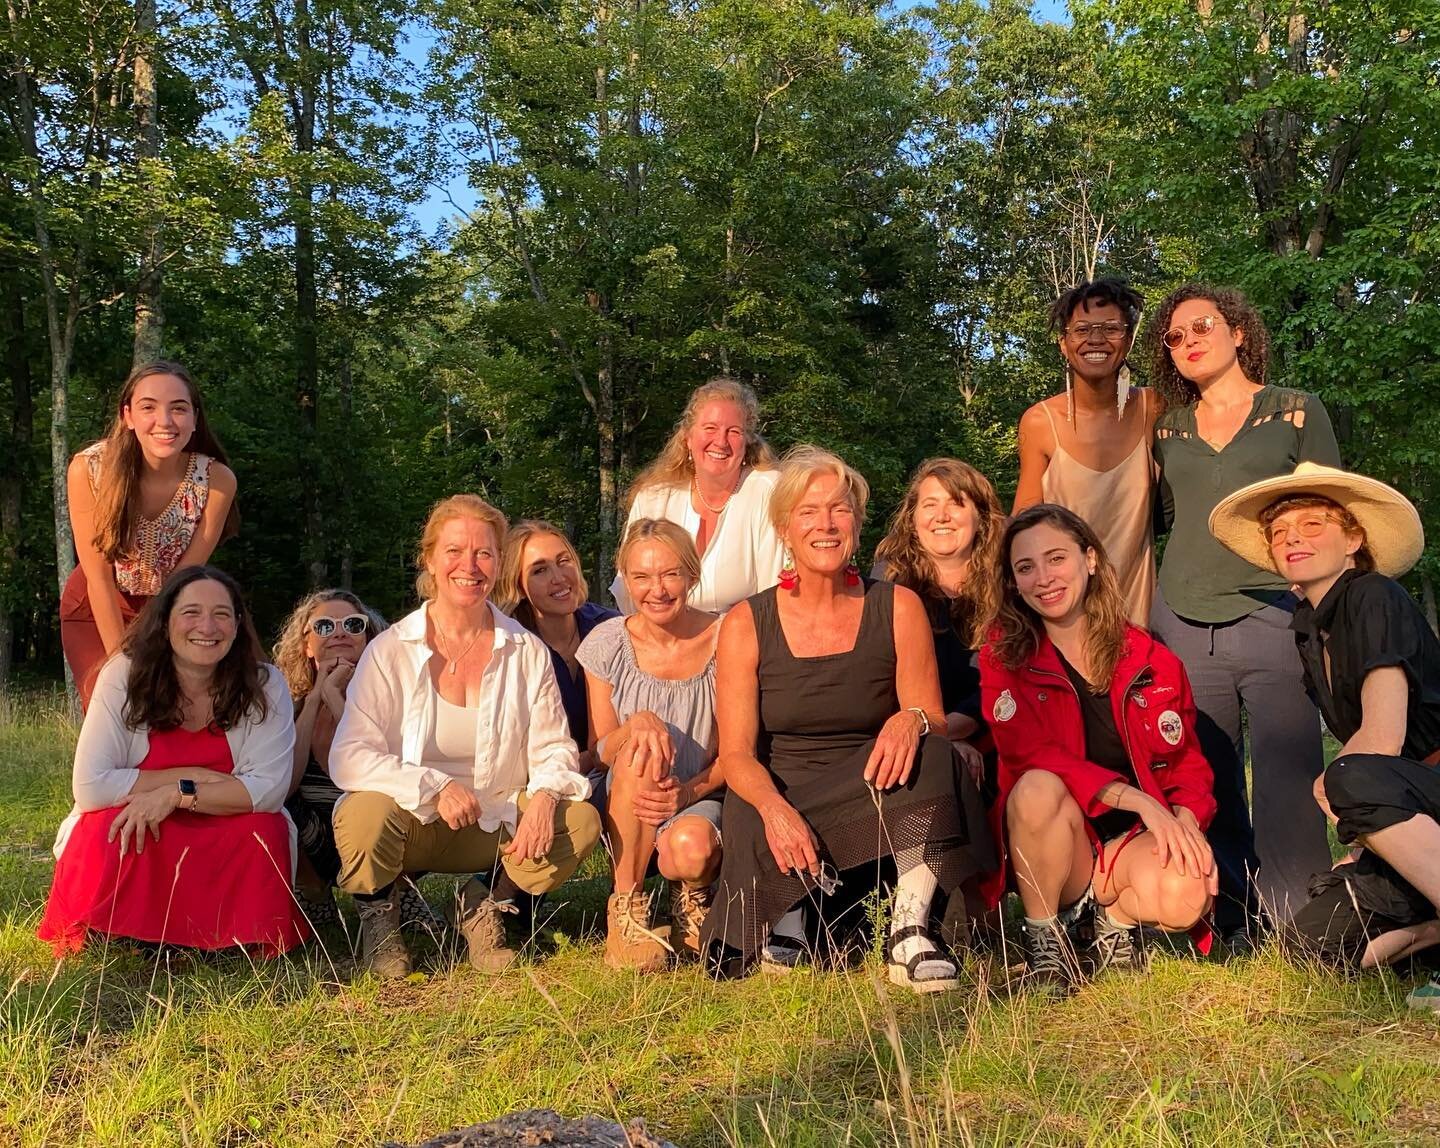 It was a pleasure to host the first upstate Fizzy Salon at Wally Farms yesterday! Thank you to all the inspiring women who made the evening so unforgettable. And thank you to @wtdiner for the spread and to @isabelwalcottmusic for the beautiful perfor